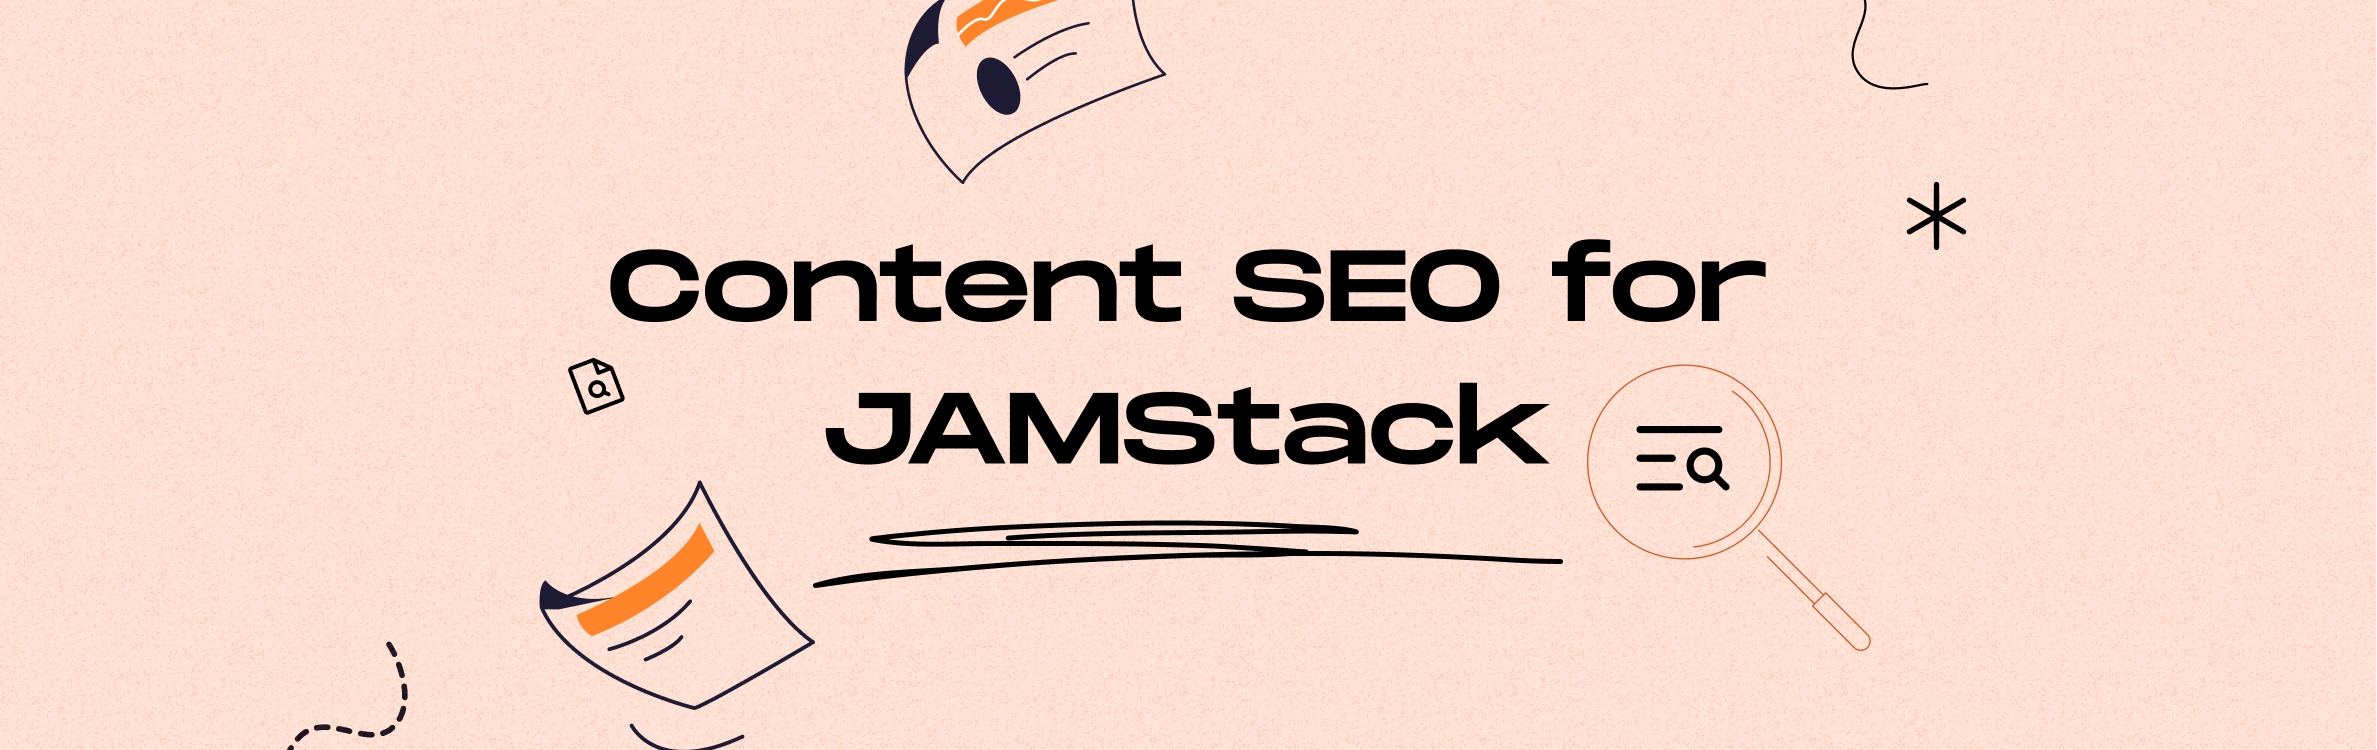 content seo for jamstack